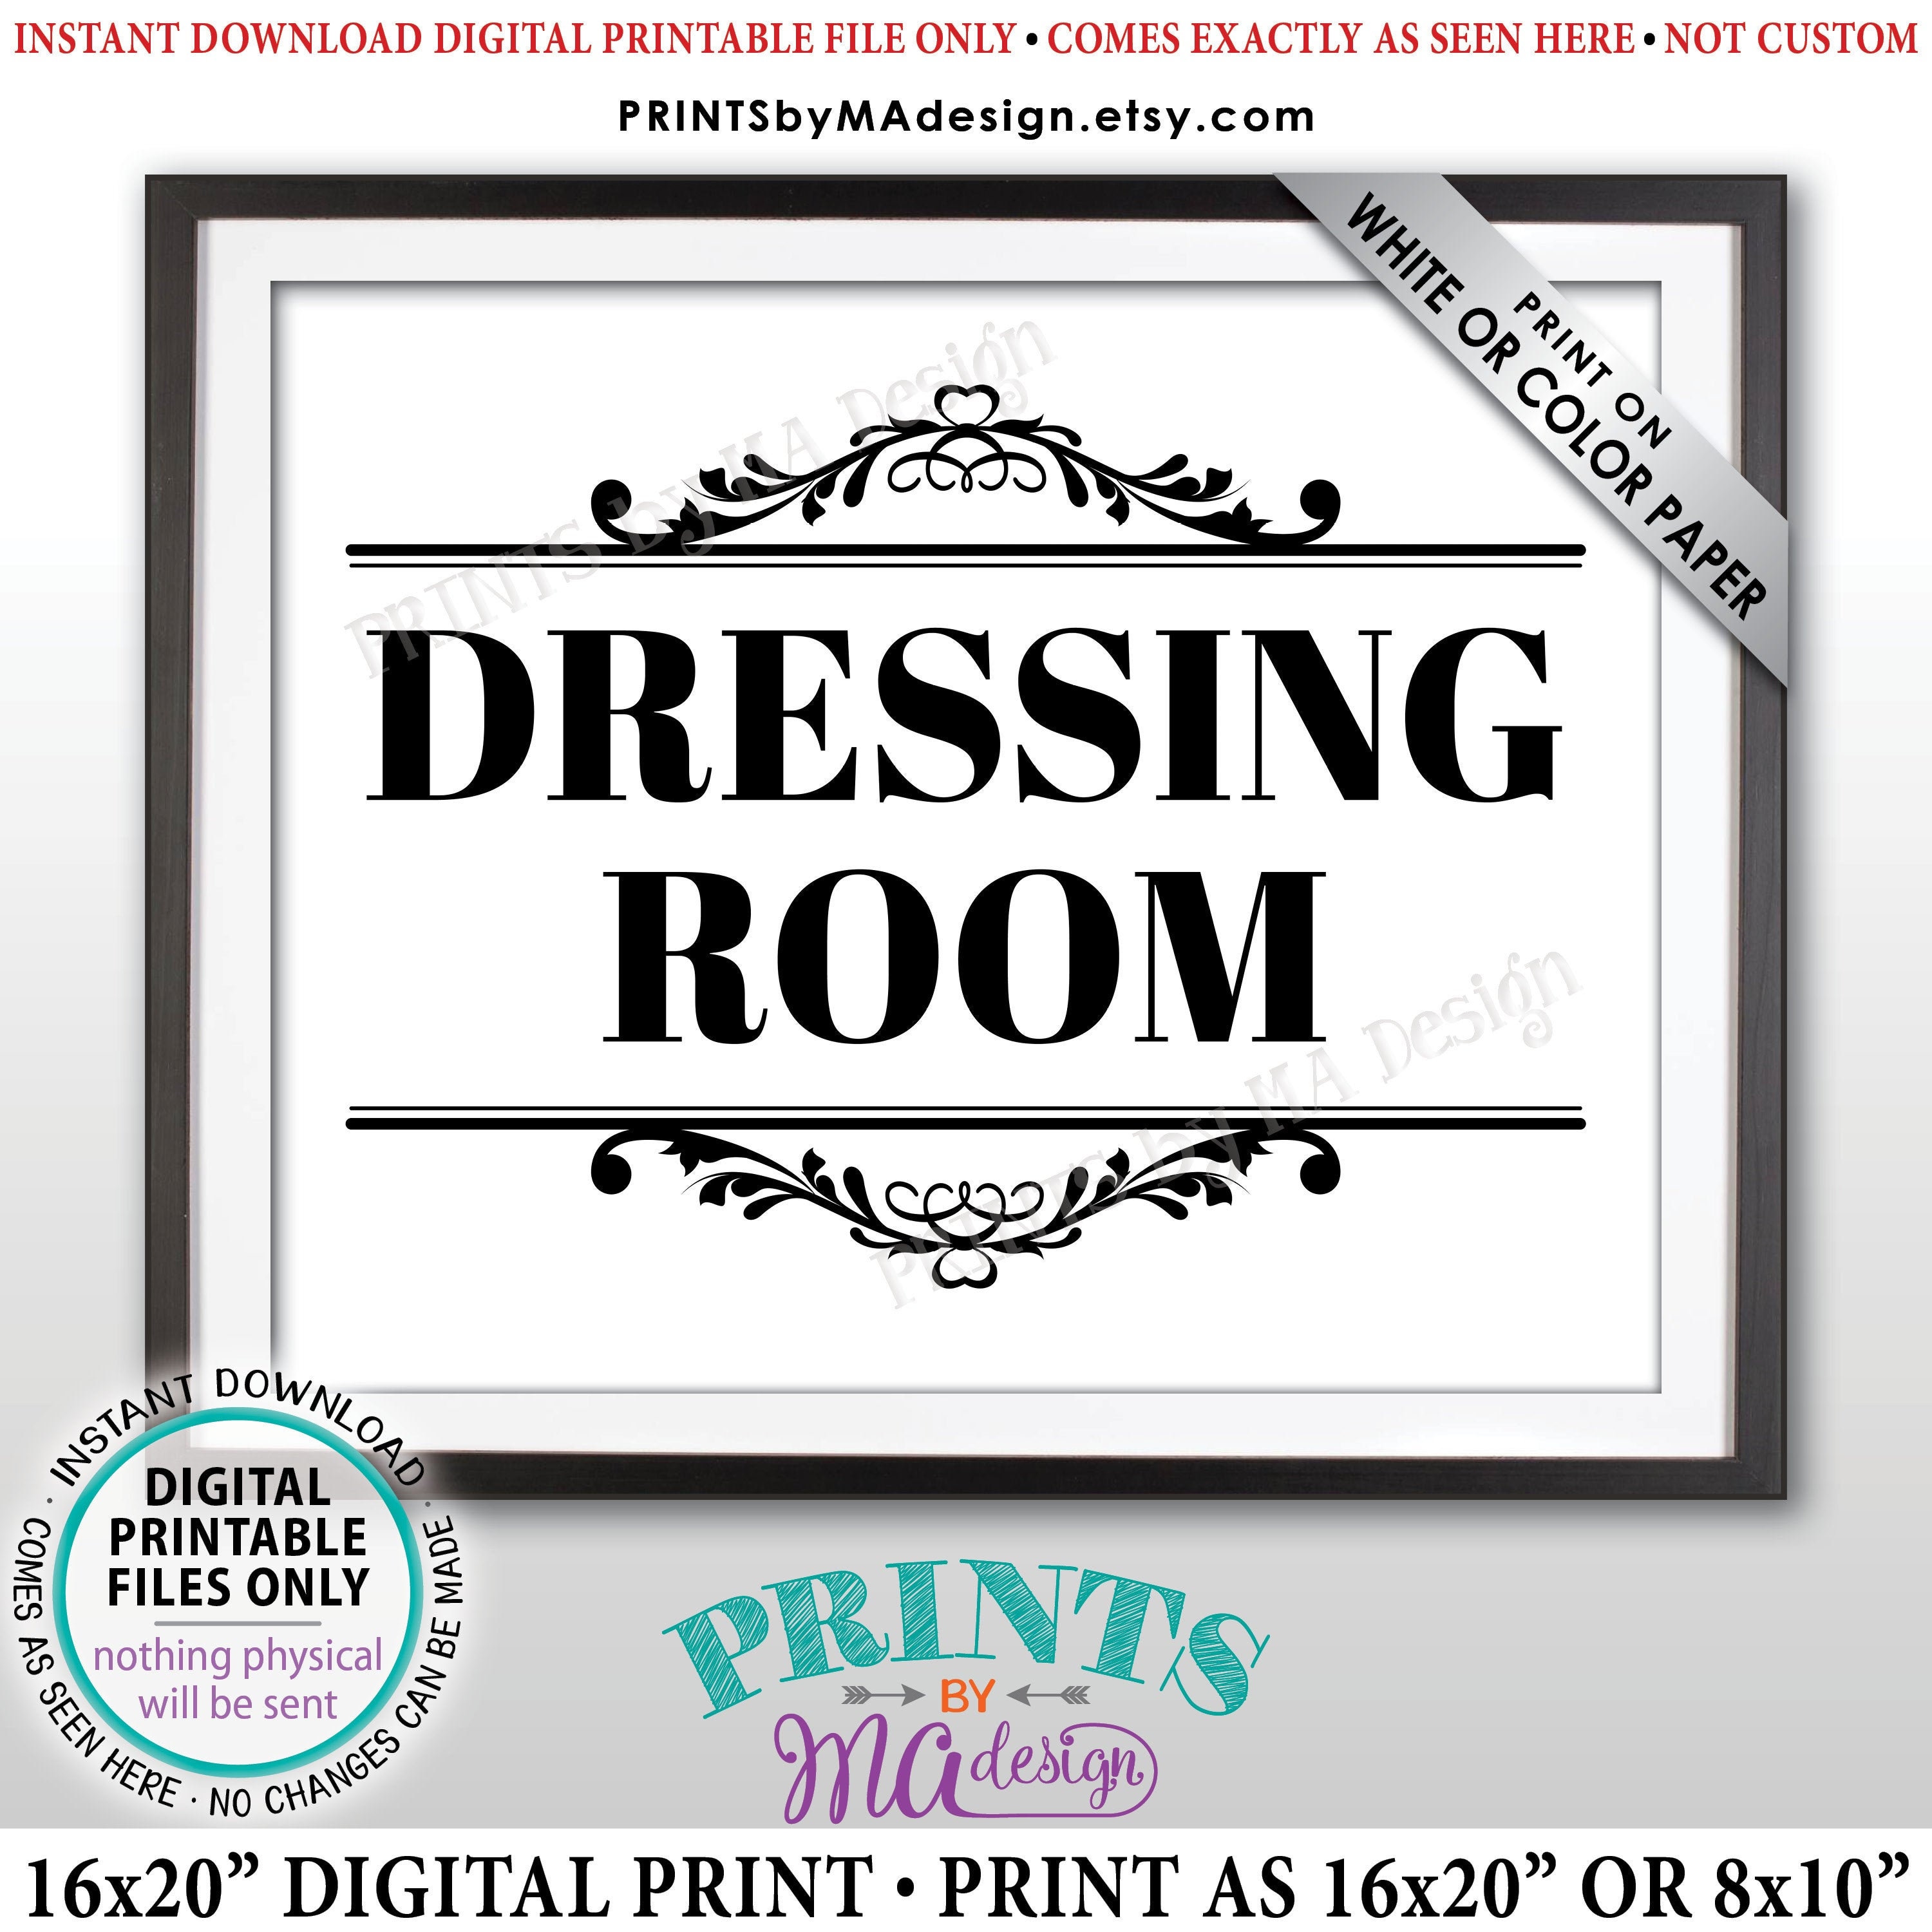 Dressing Room Sign Fitting Room Sign Privacy Please Printable 8x10 16x20 Sign